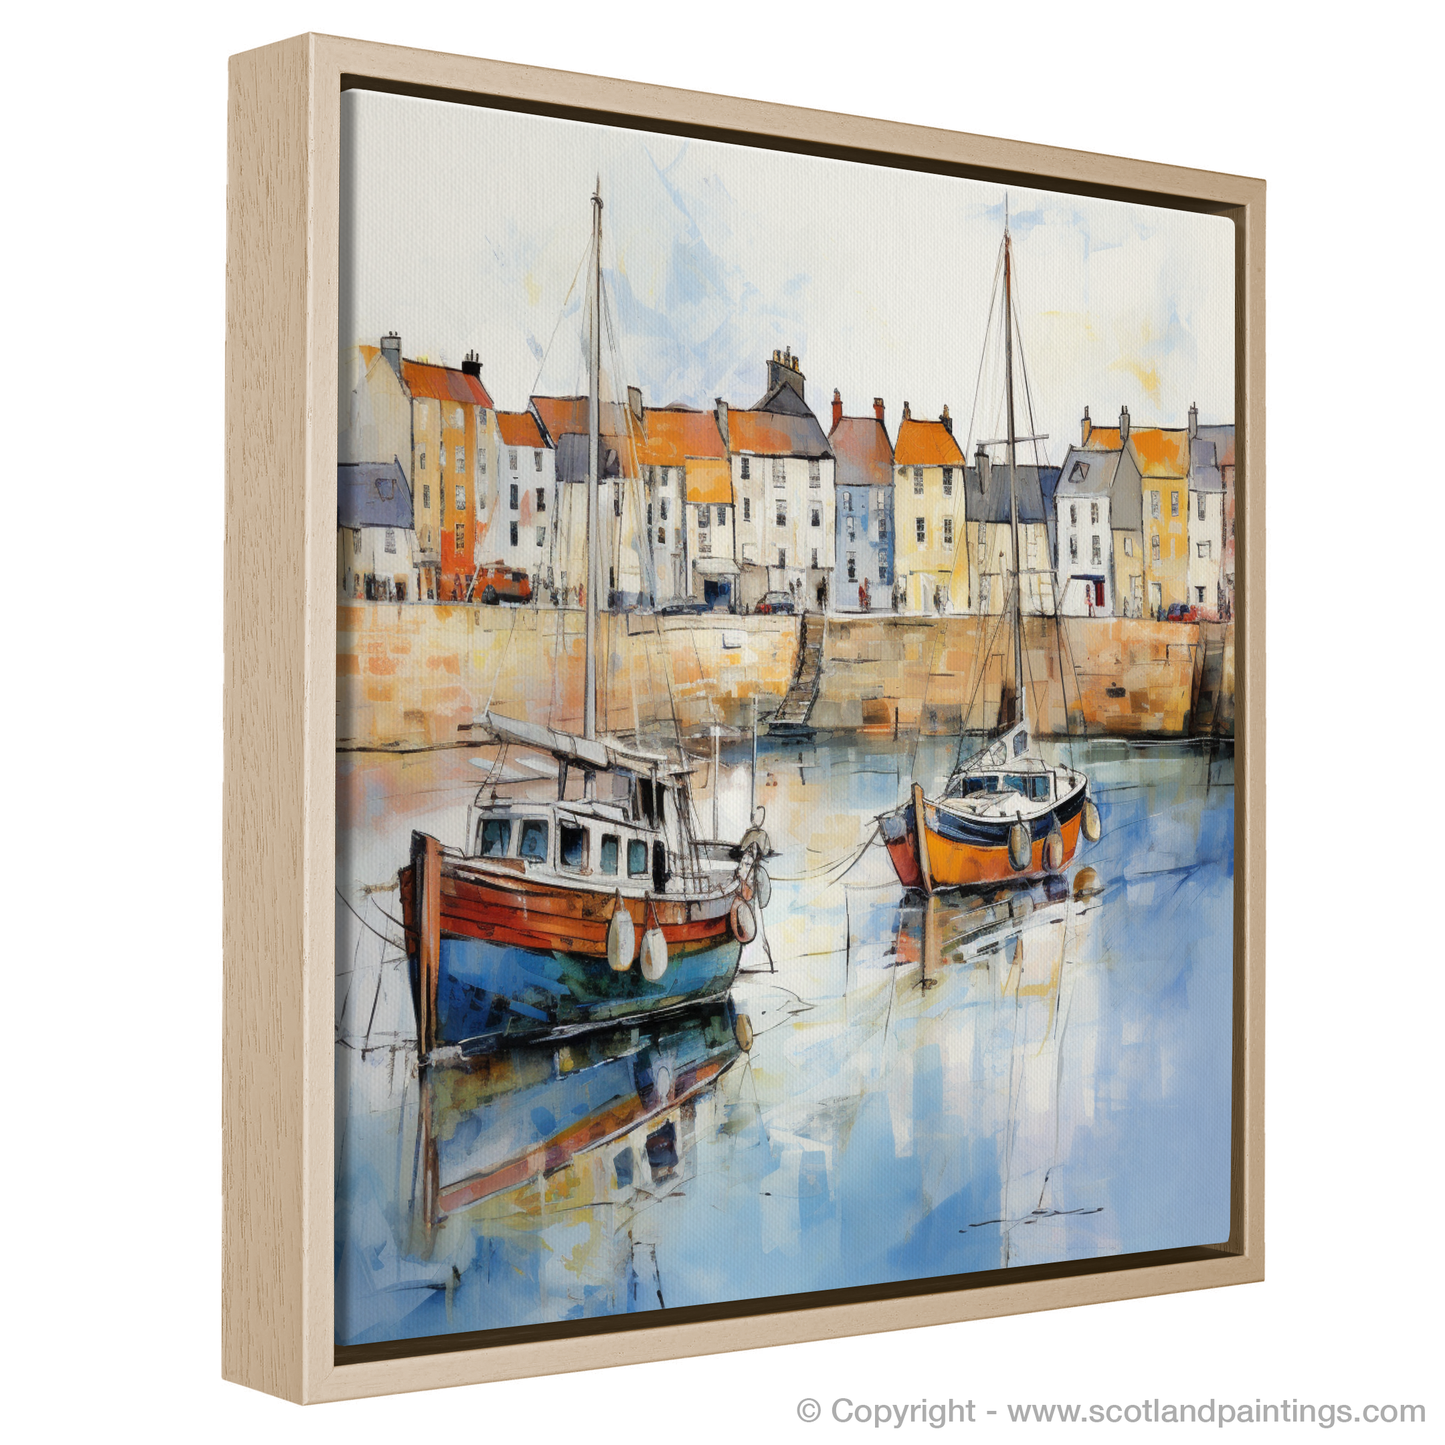 Anstruther's Dreamy Waterfront: An Impressionist Tribute